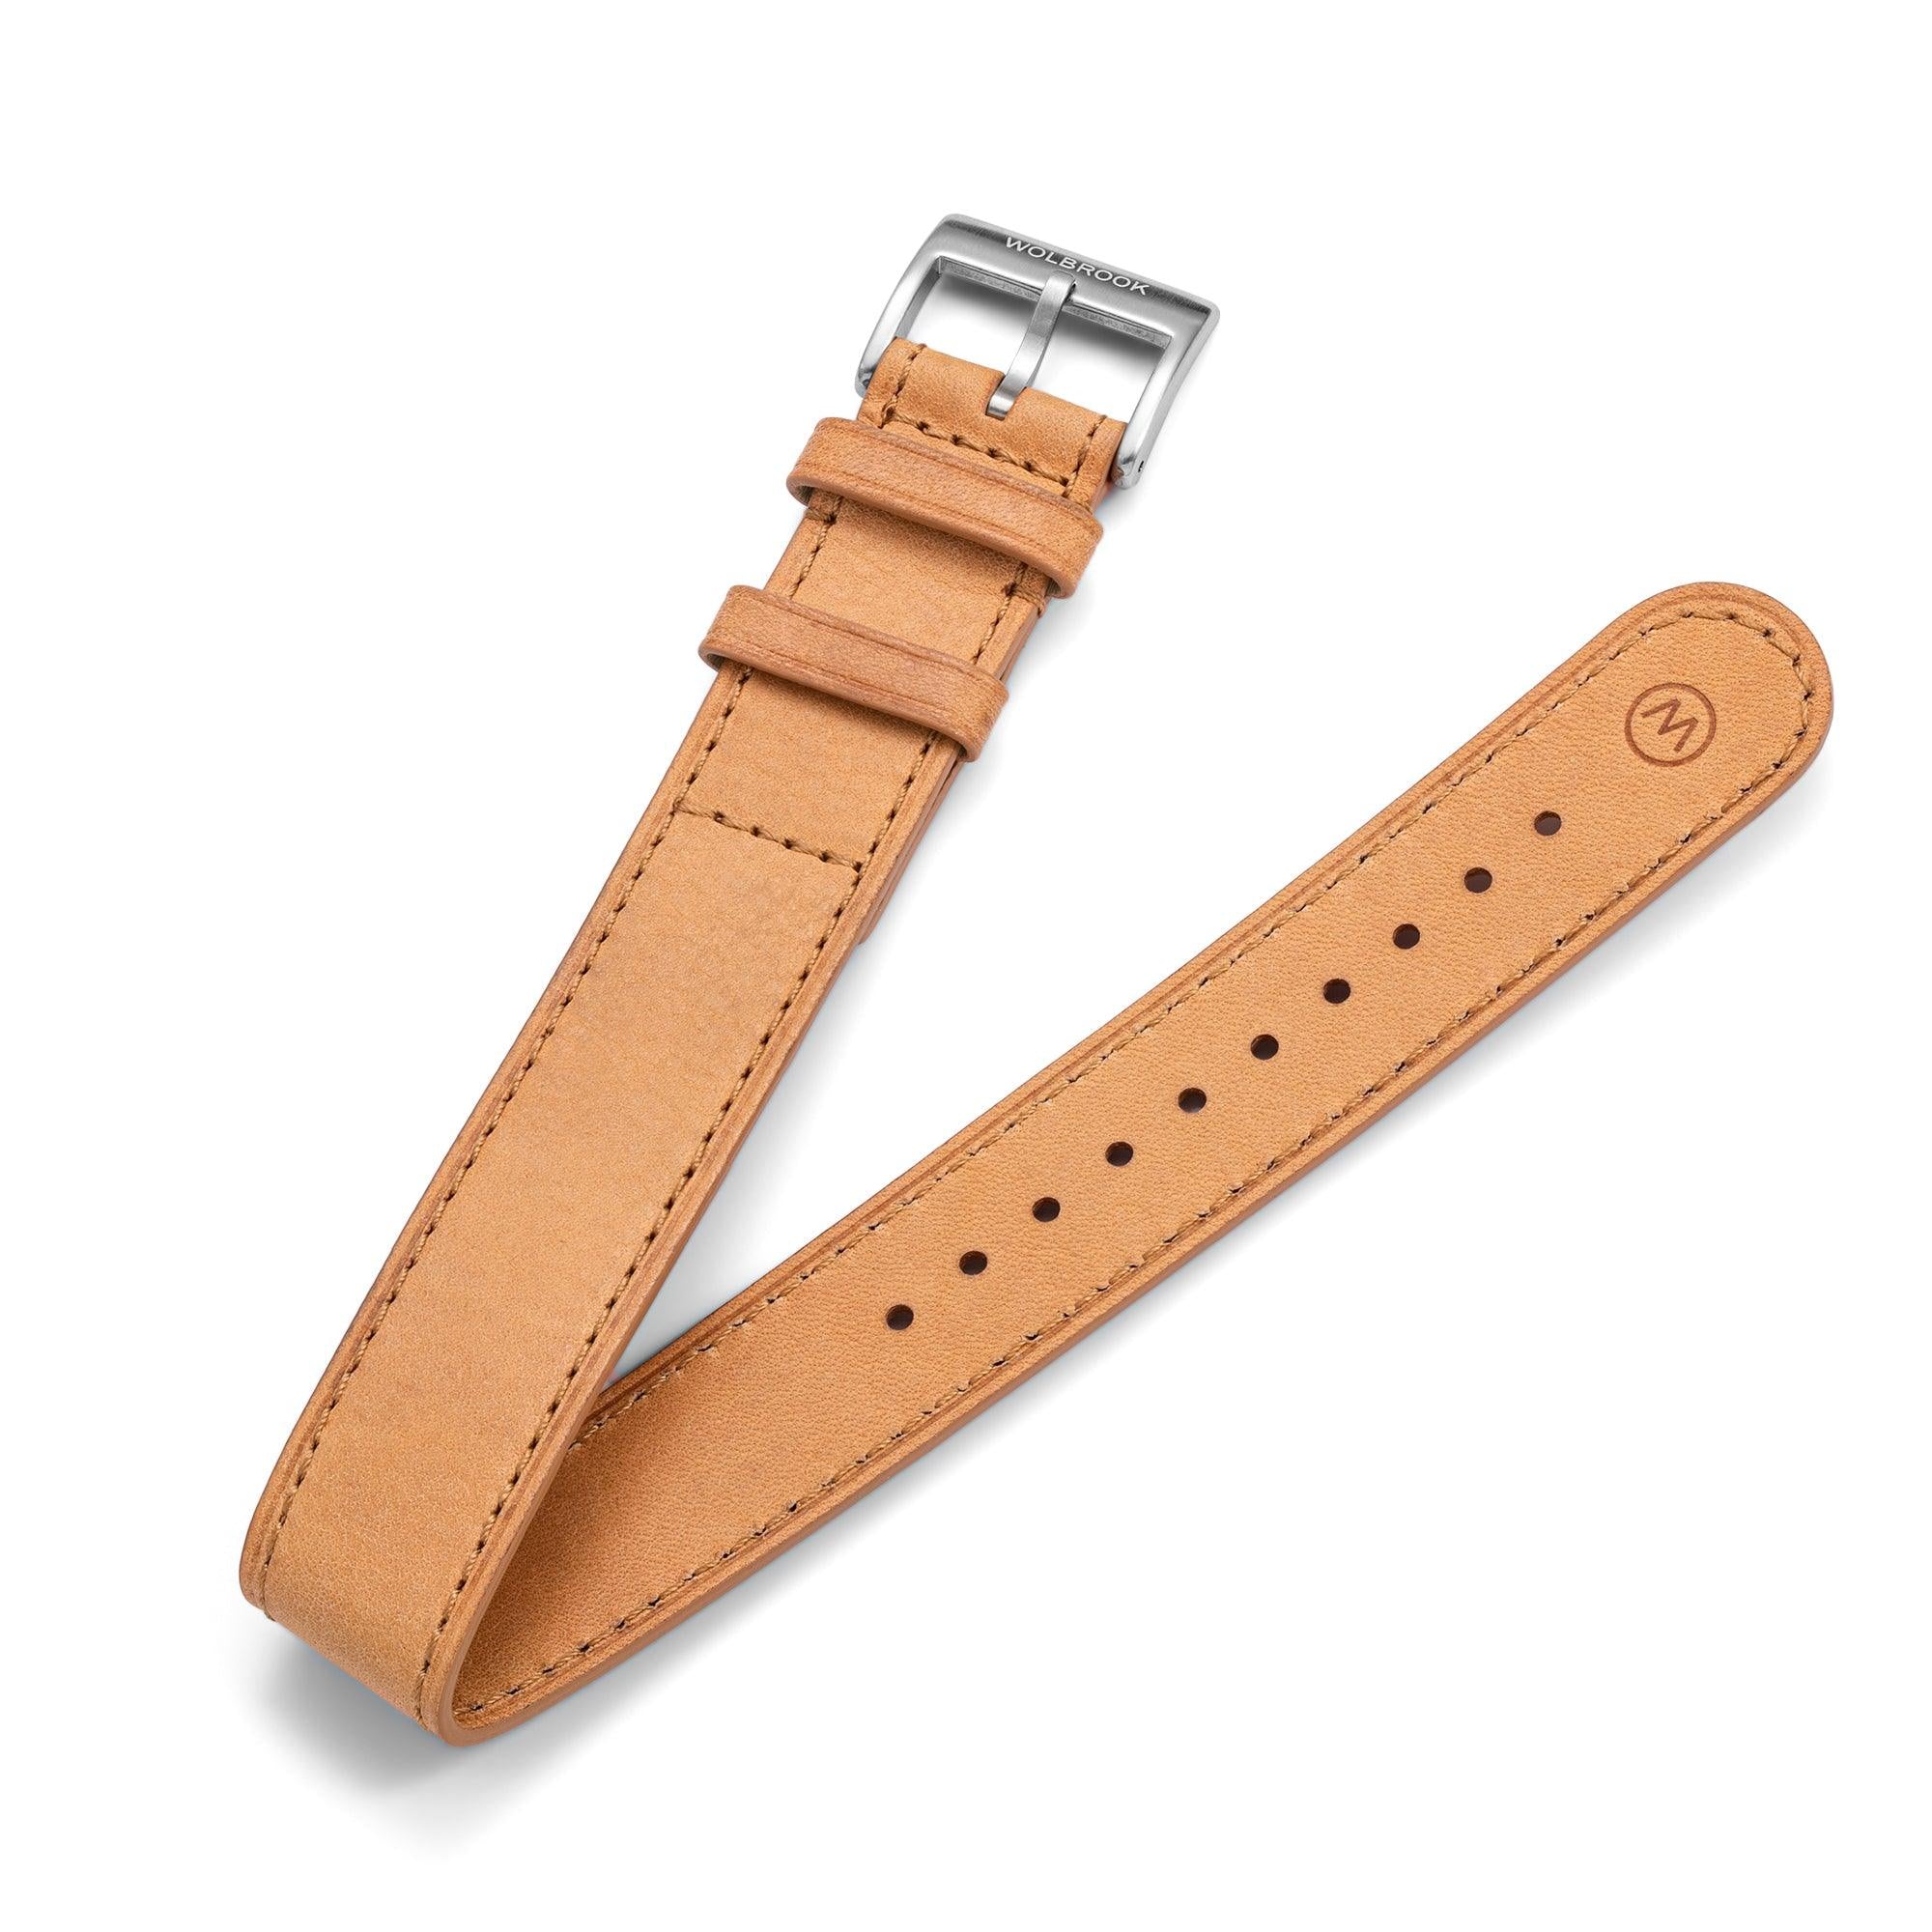 One-Piece Camel Leather Band & Steel Buckle